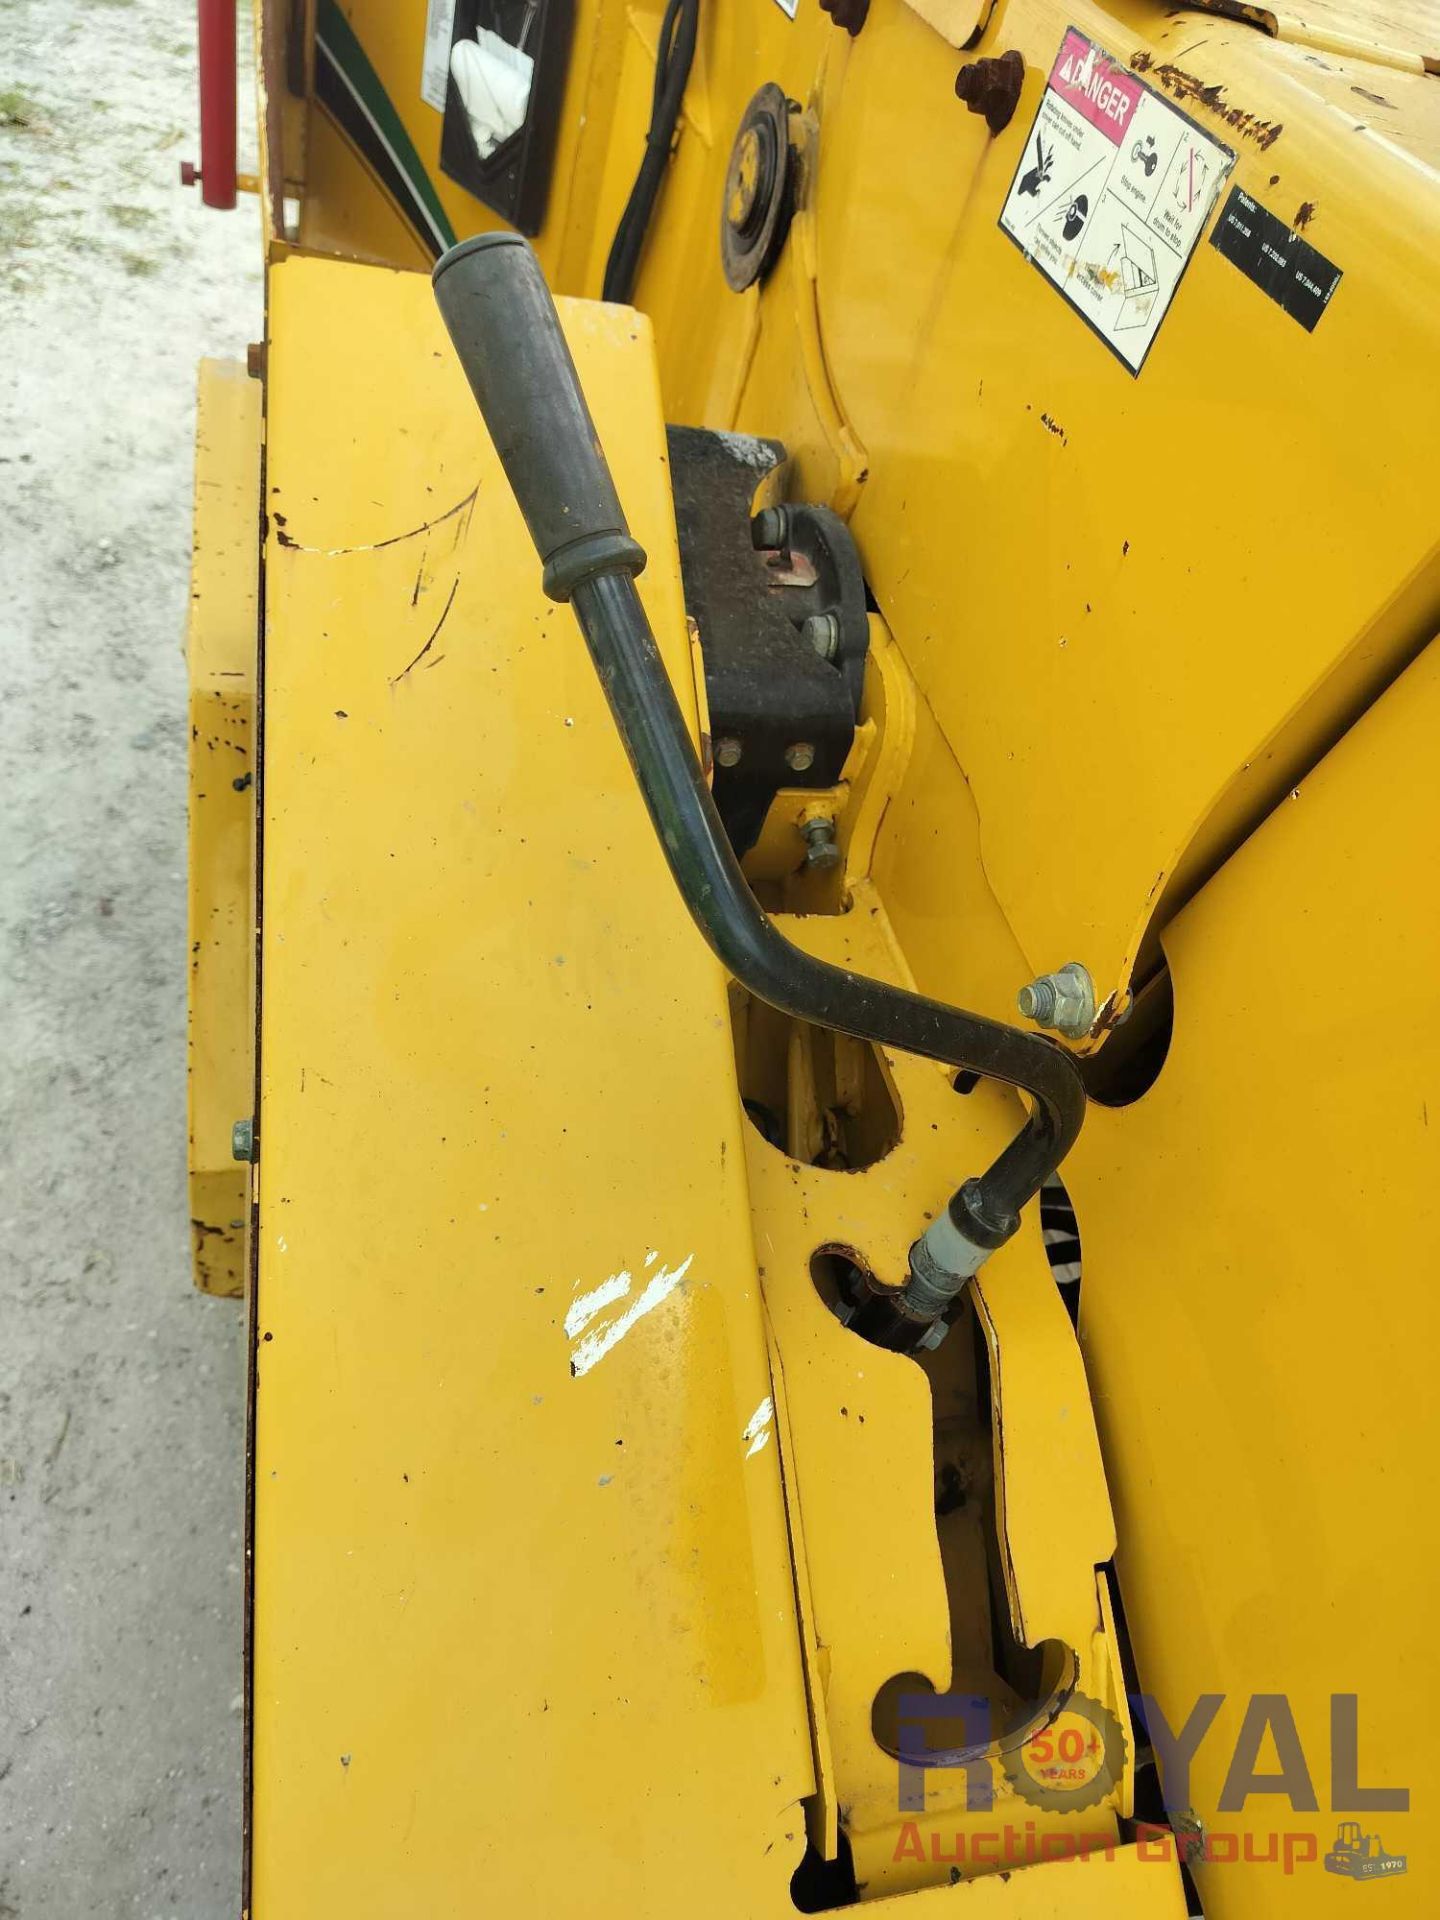 2015 Vermeer BC1000XL S/A Towable Brush Chipper - Image 7 of 17